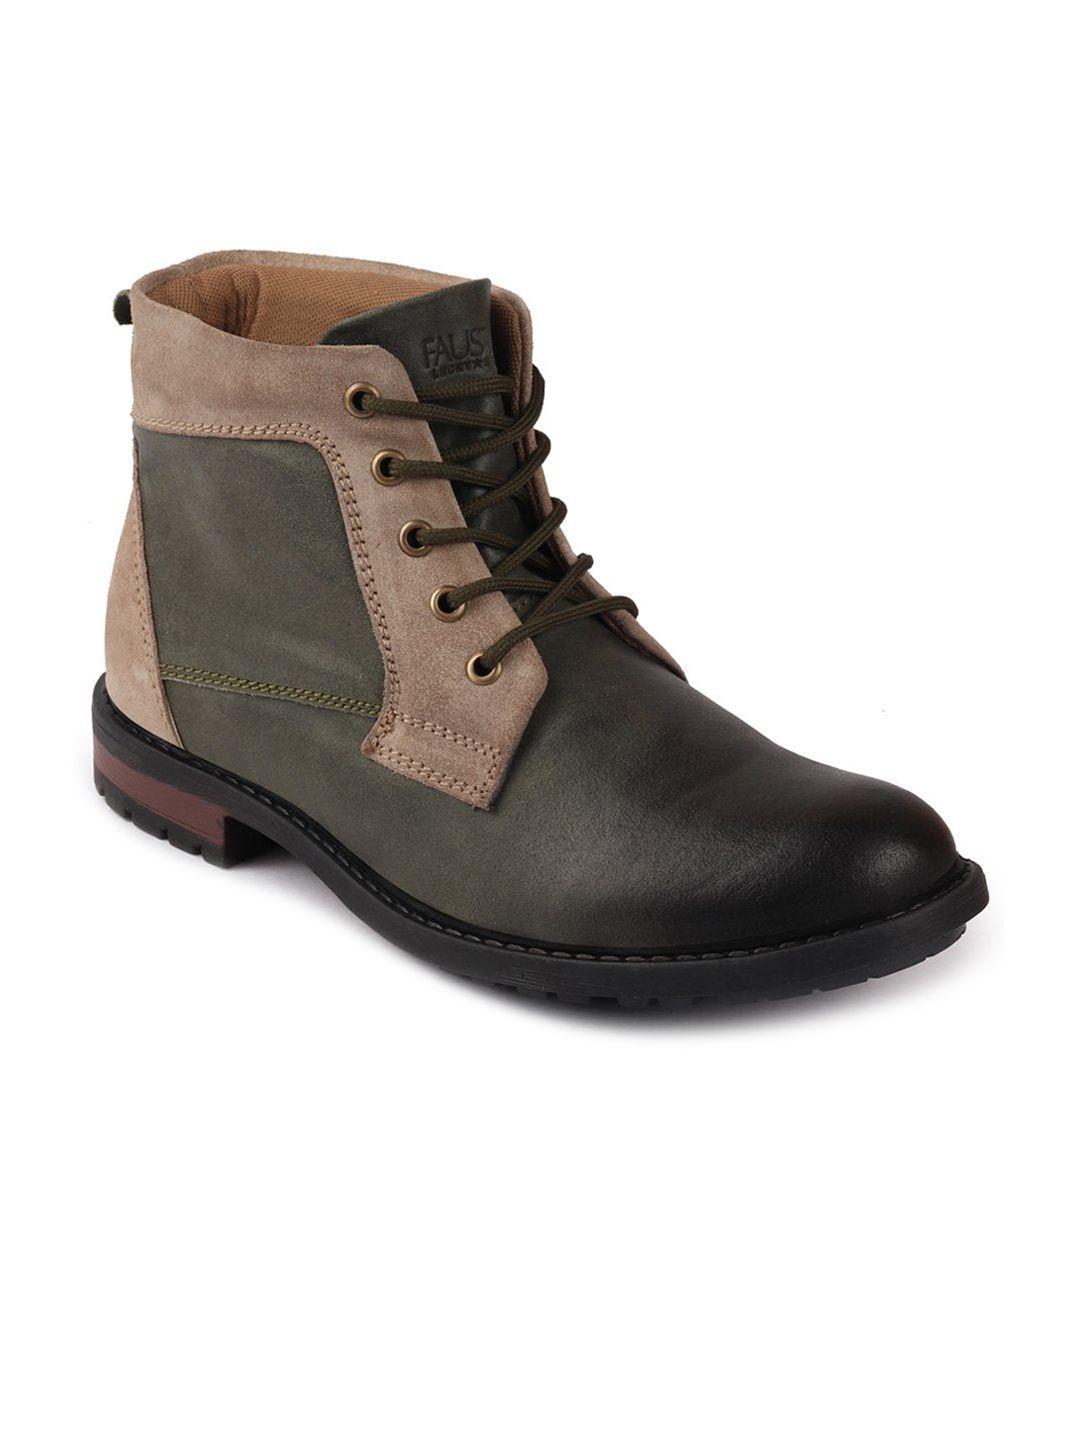 fausto men olive green high ankle lace up winter leather boots